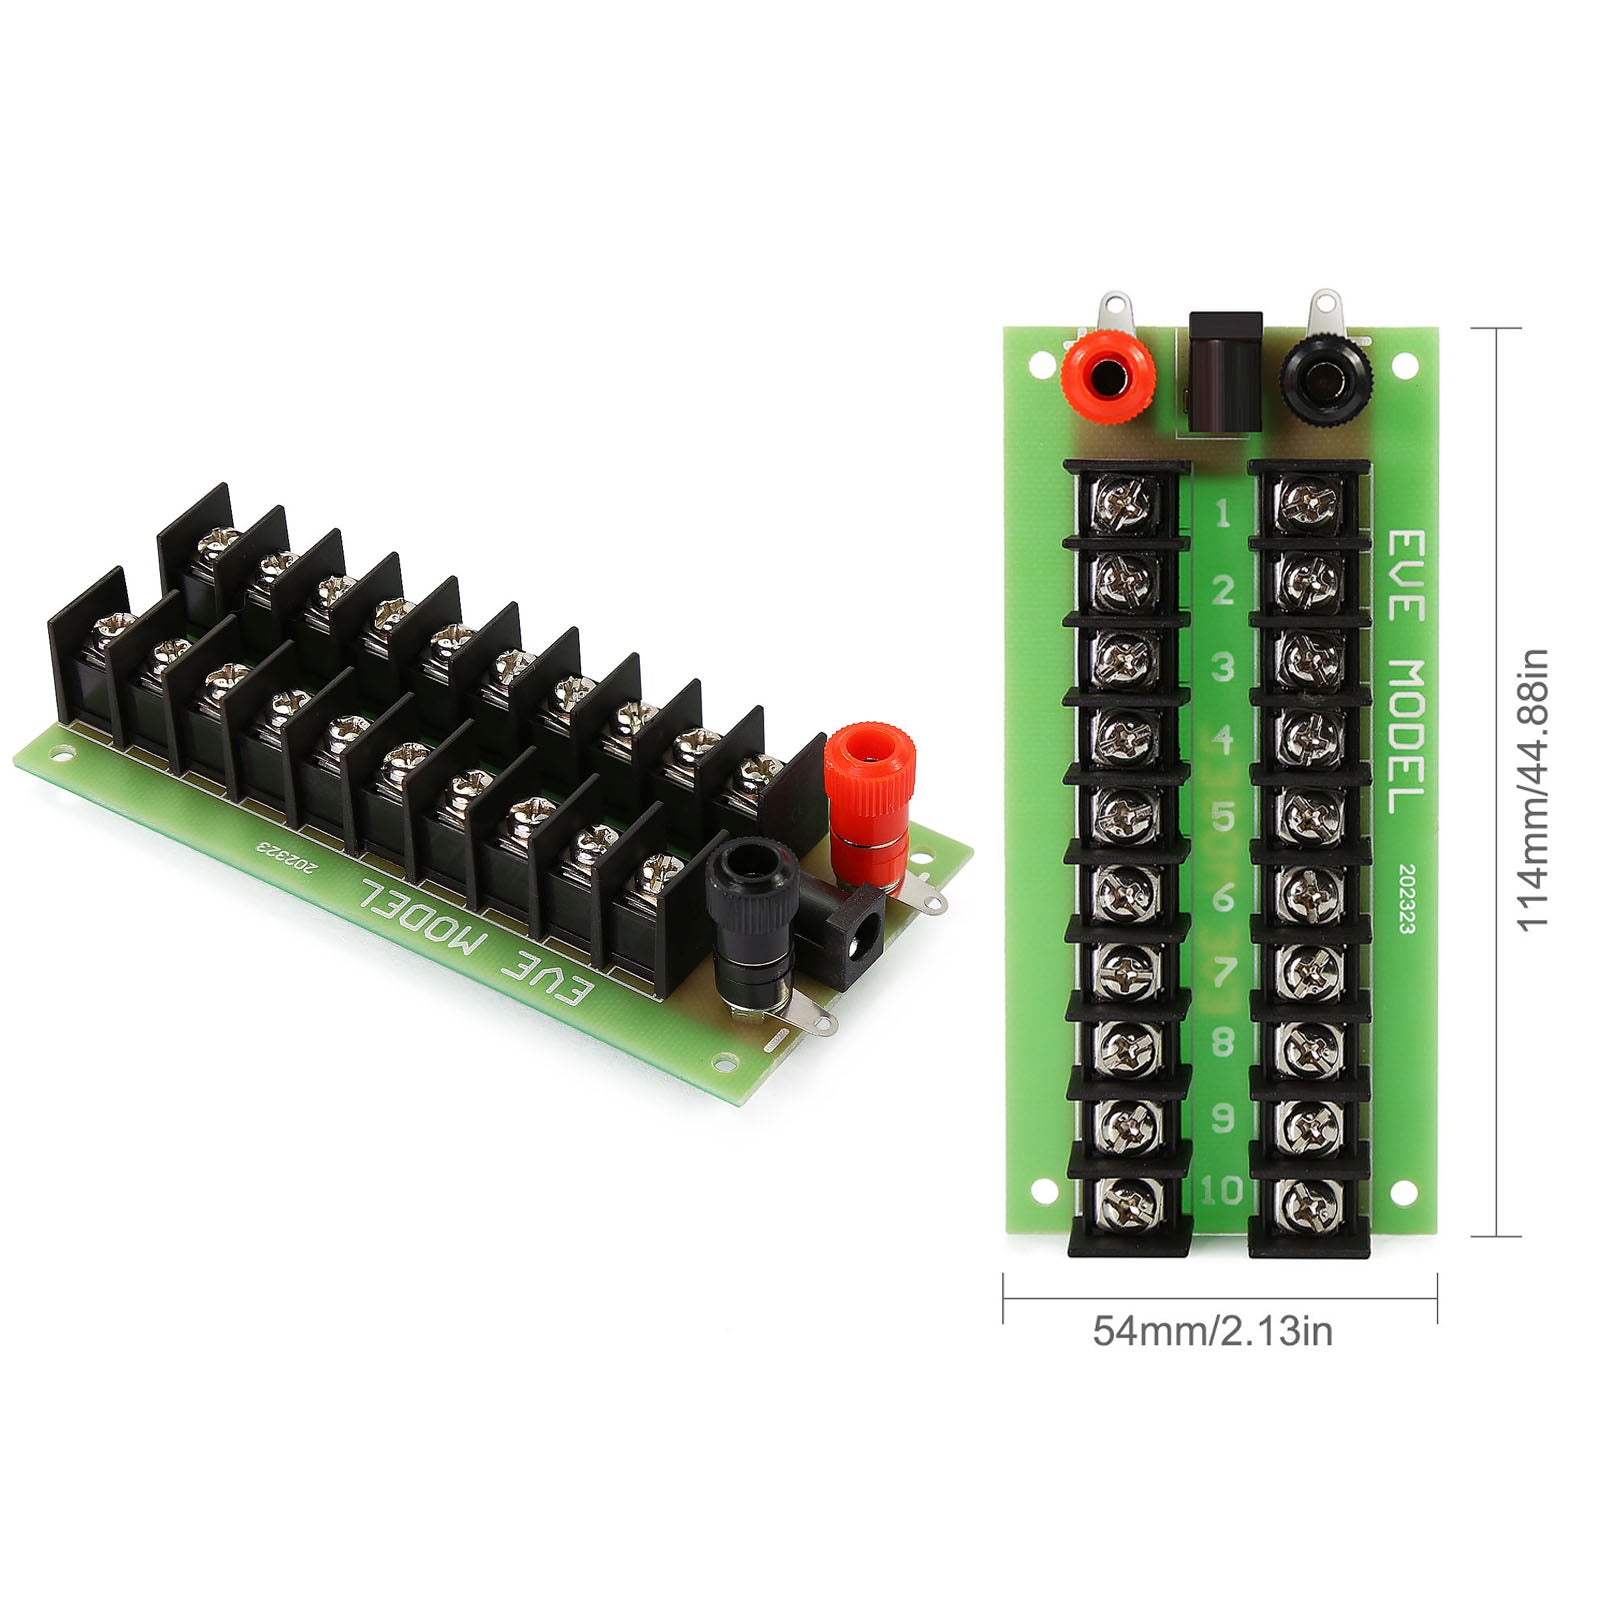 PCB005 1 Set Power Distribution Board 3 Inputs 2 x 10 Outputs for DC AC Voltage